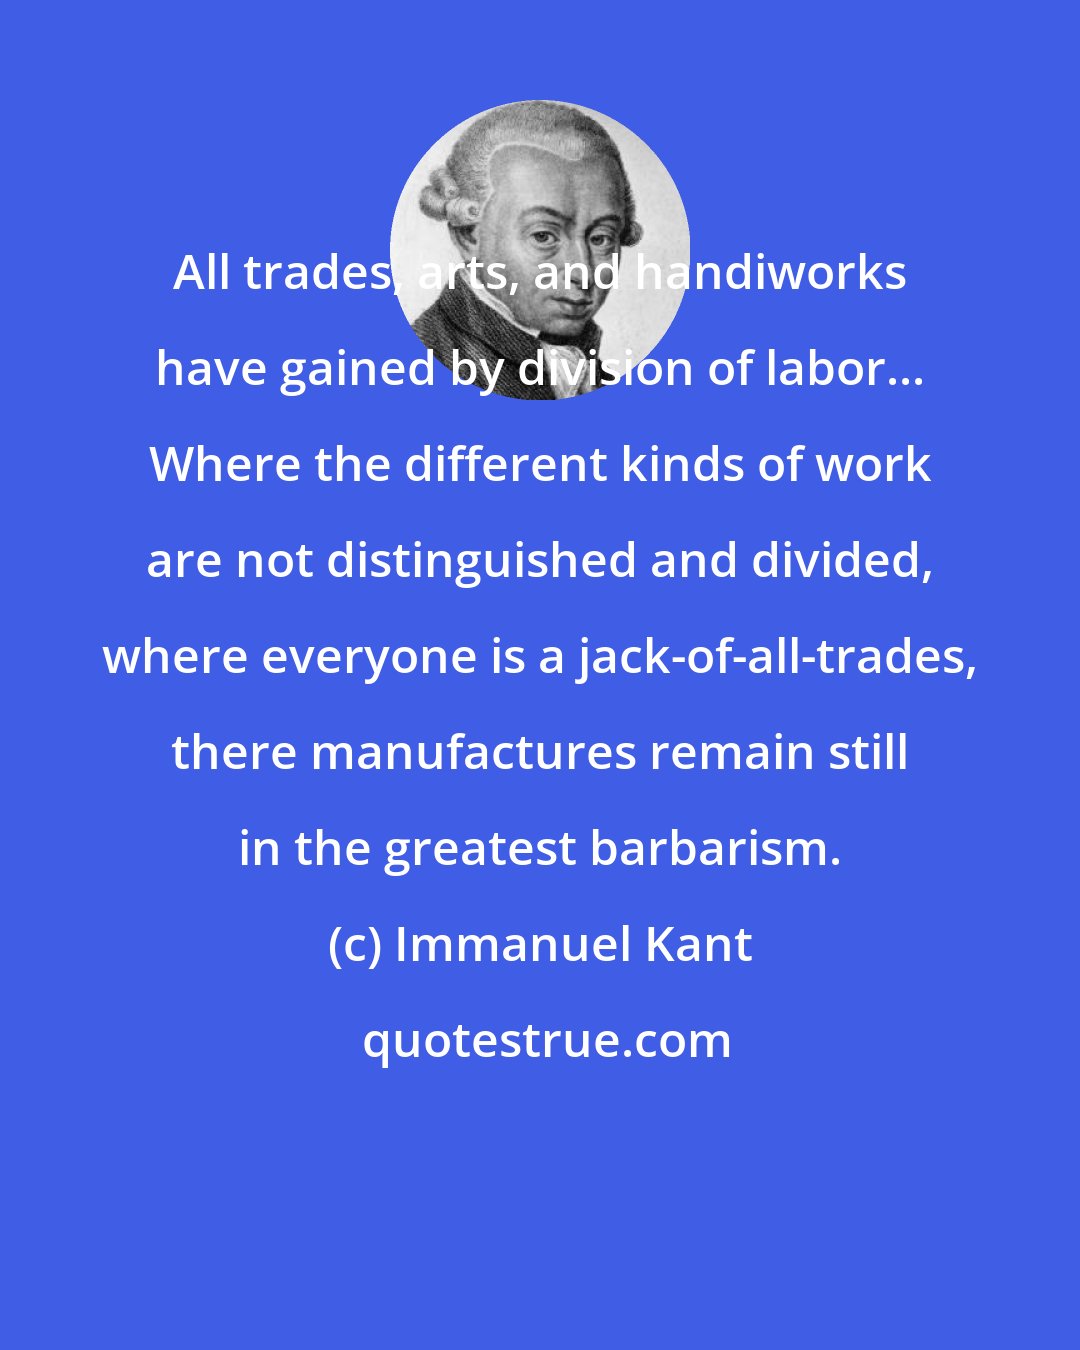 Immanuel Kant: All trades, arts, and handiworks have gained by division of labor... Where the different kinds of work are not distinguished and divided, where everyone is a jack-of-all-trades, there manufactures remain still in the greatest barbarism.